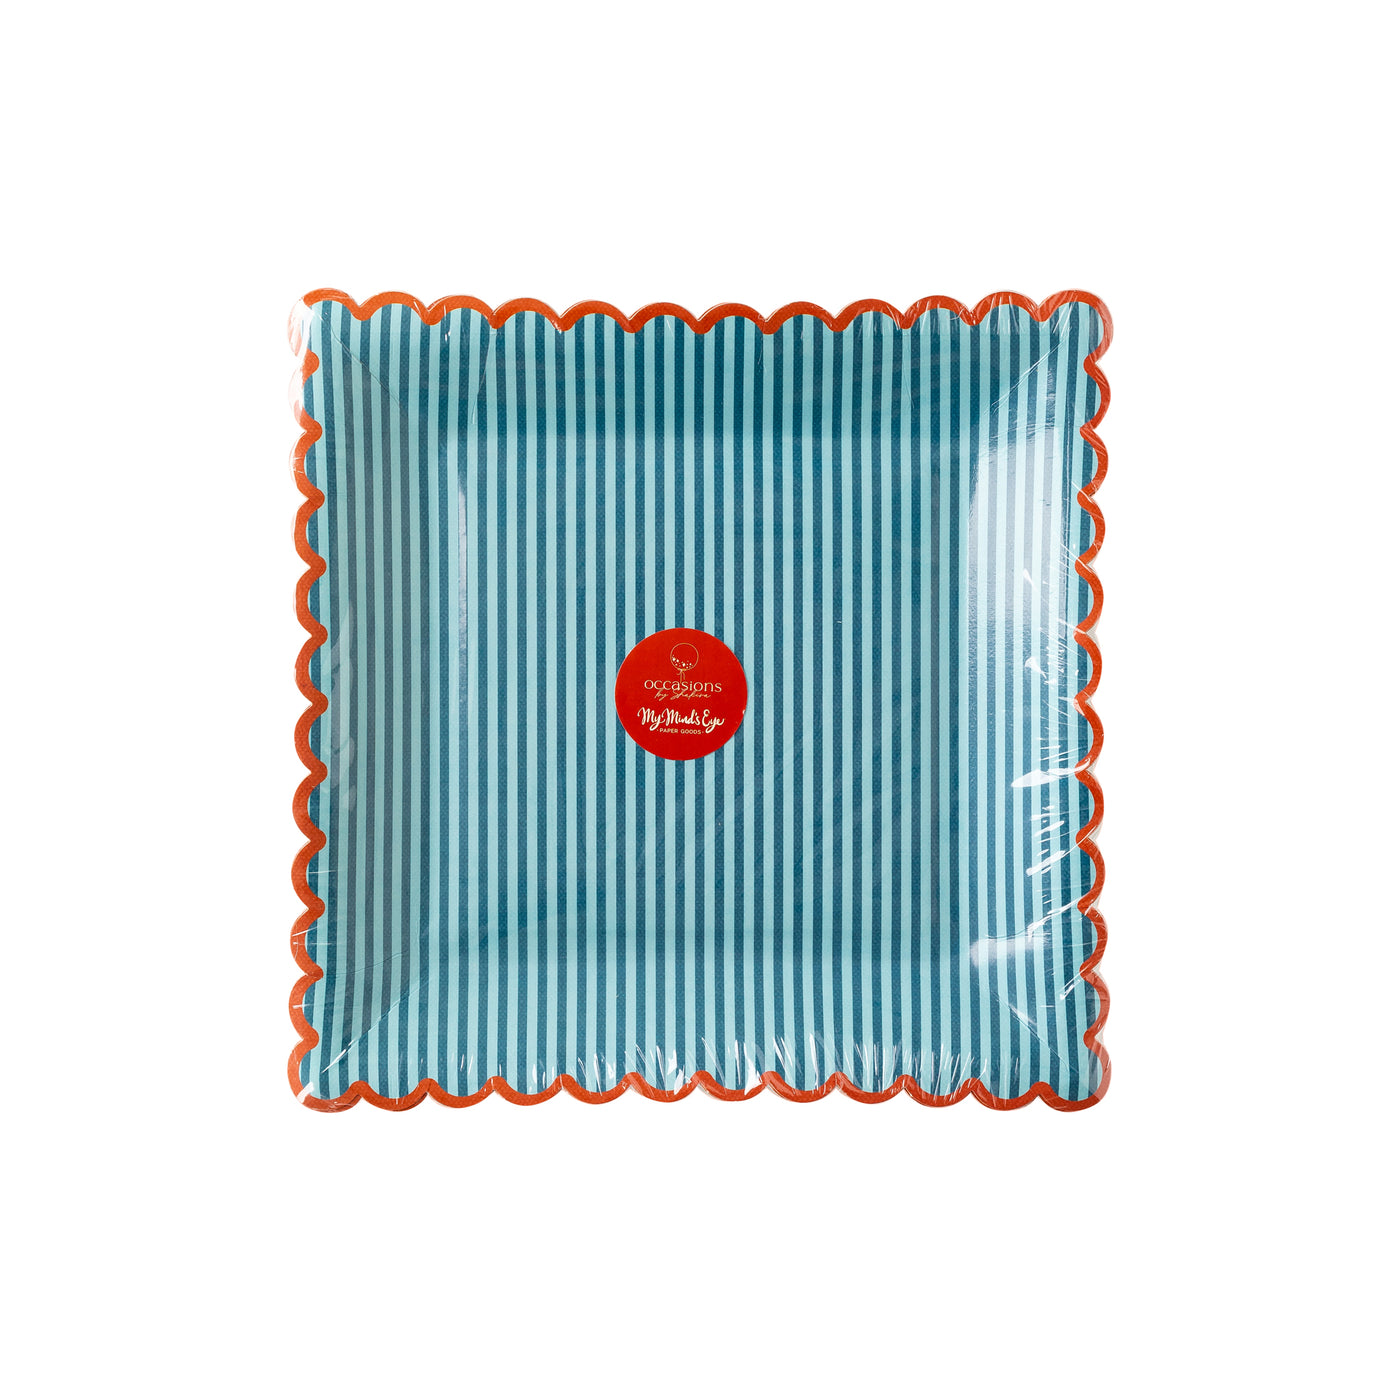 SSP946 - Occasions by Shakira - Red with Blue Stripe Plate